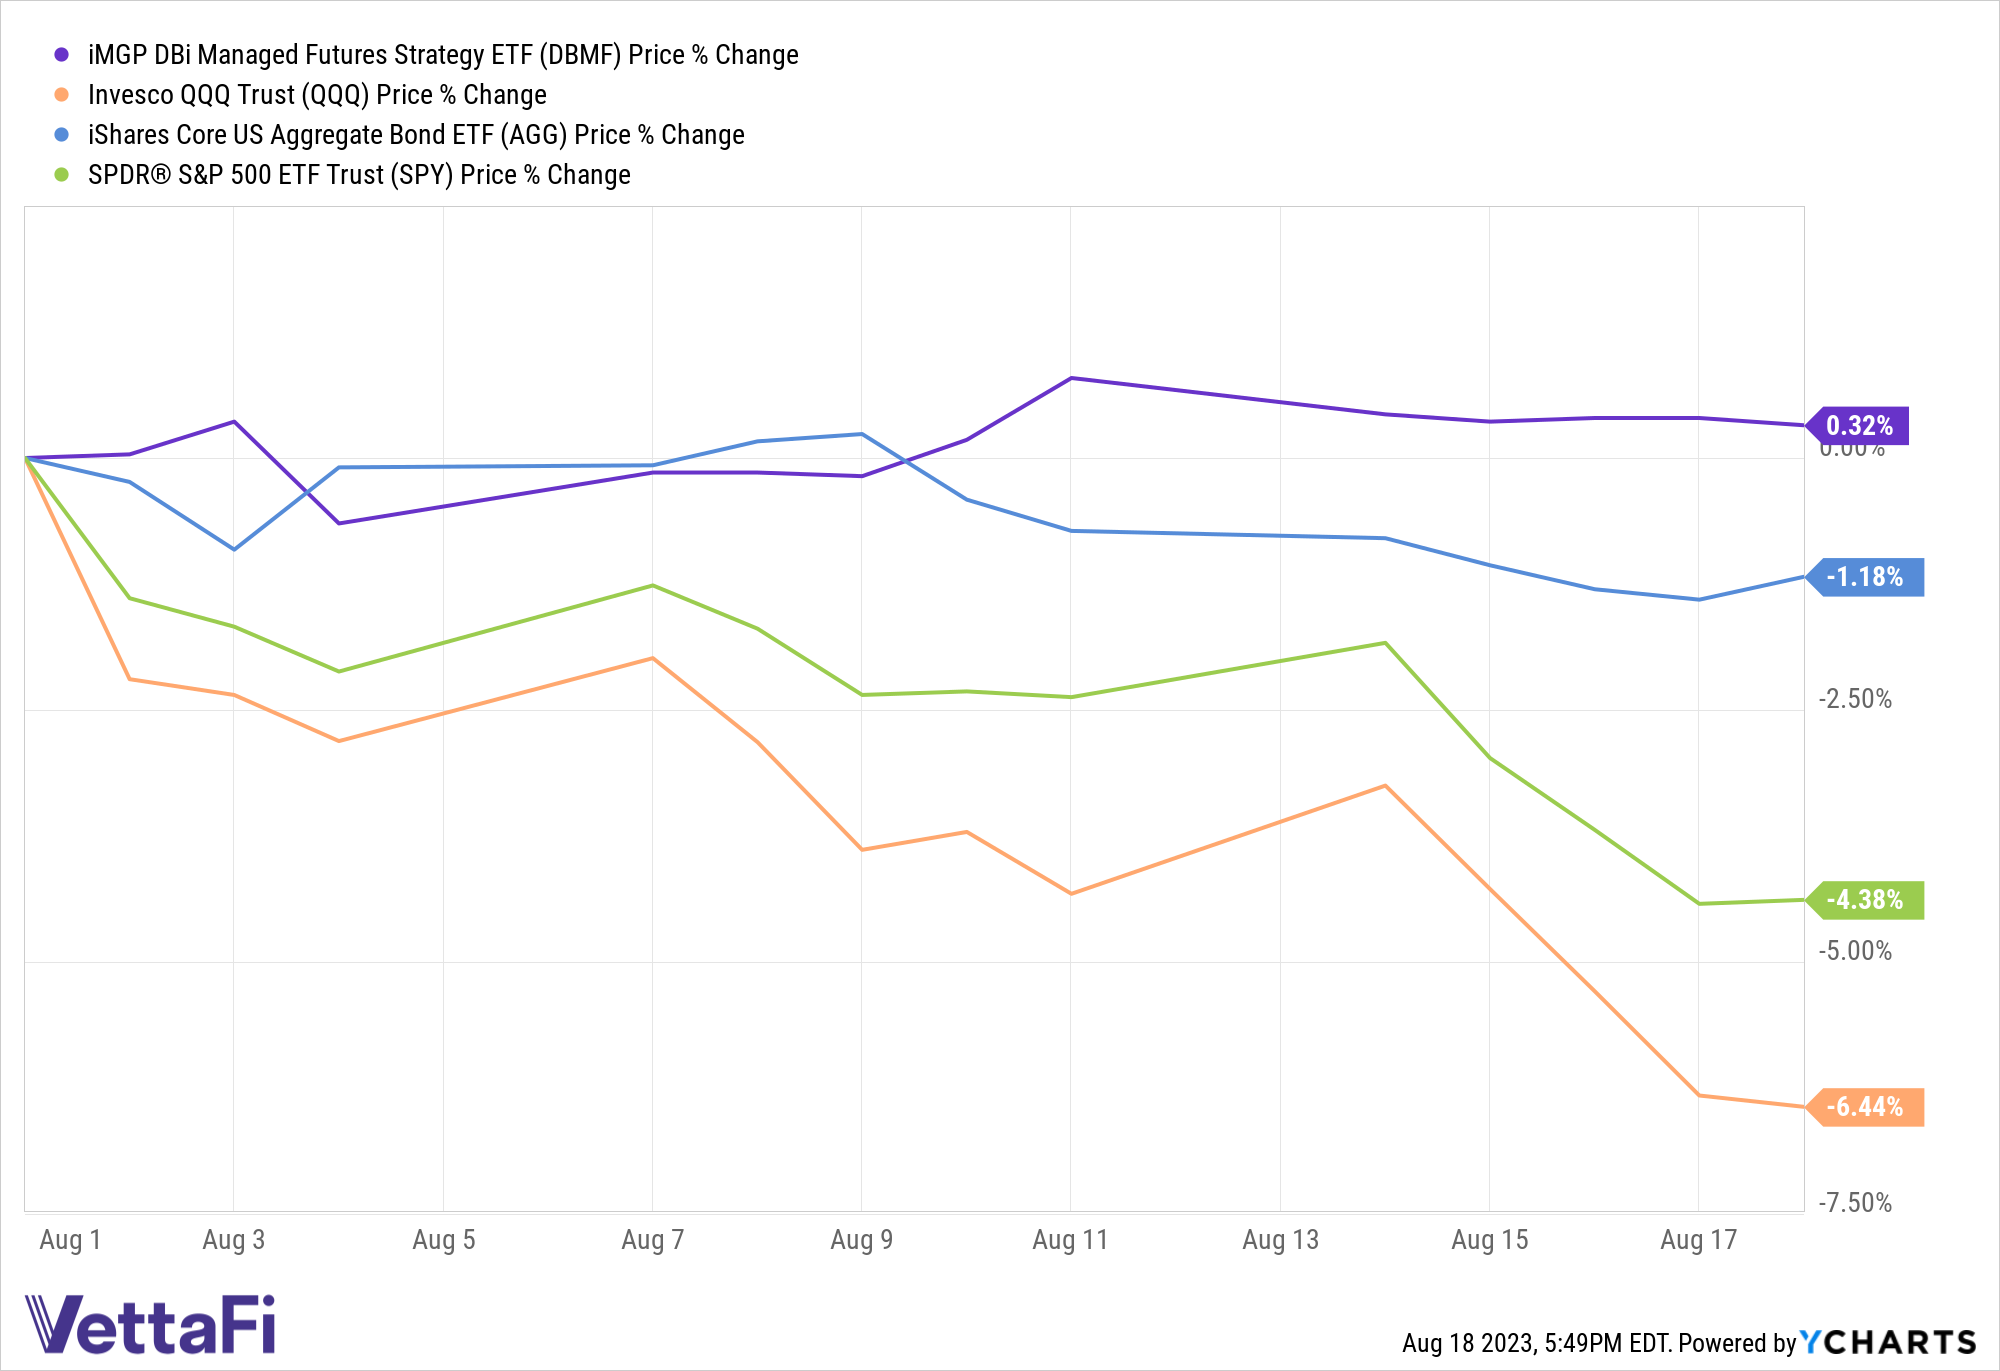 Price returns of DBMF (0.32%), QQQ (-6.44%), AGG (-1.18%), and SPY (-4.38%) from August 1-August 18, 2023.